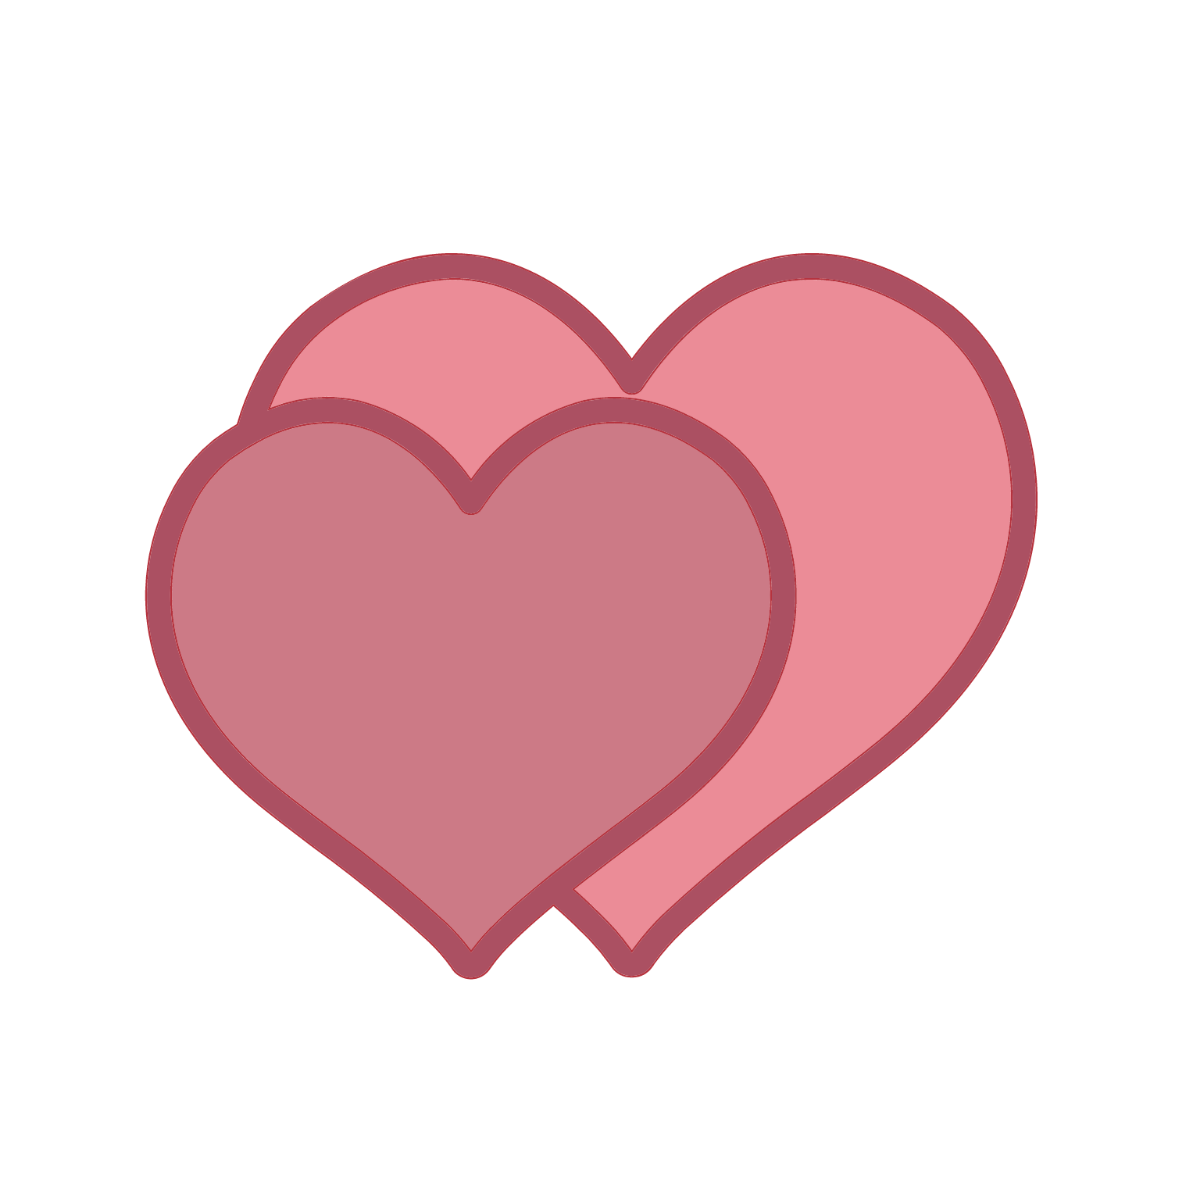 2 Hearts Clipart Template